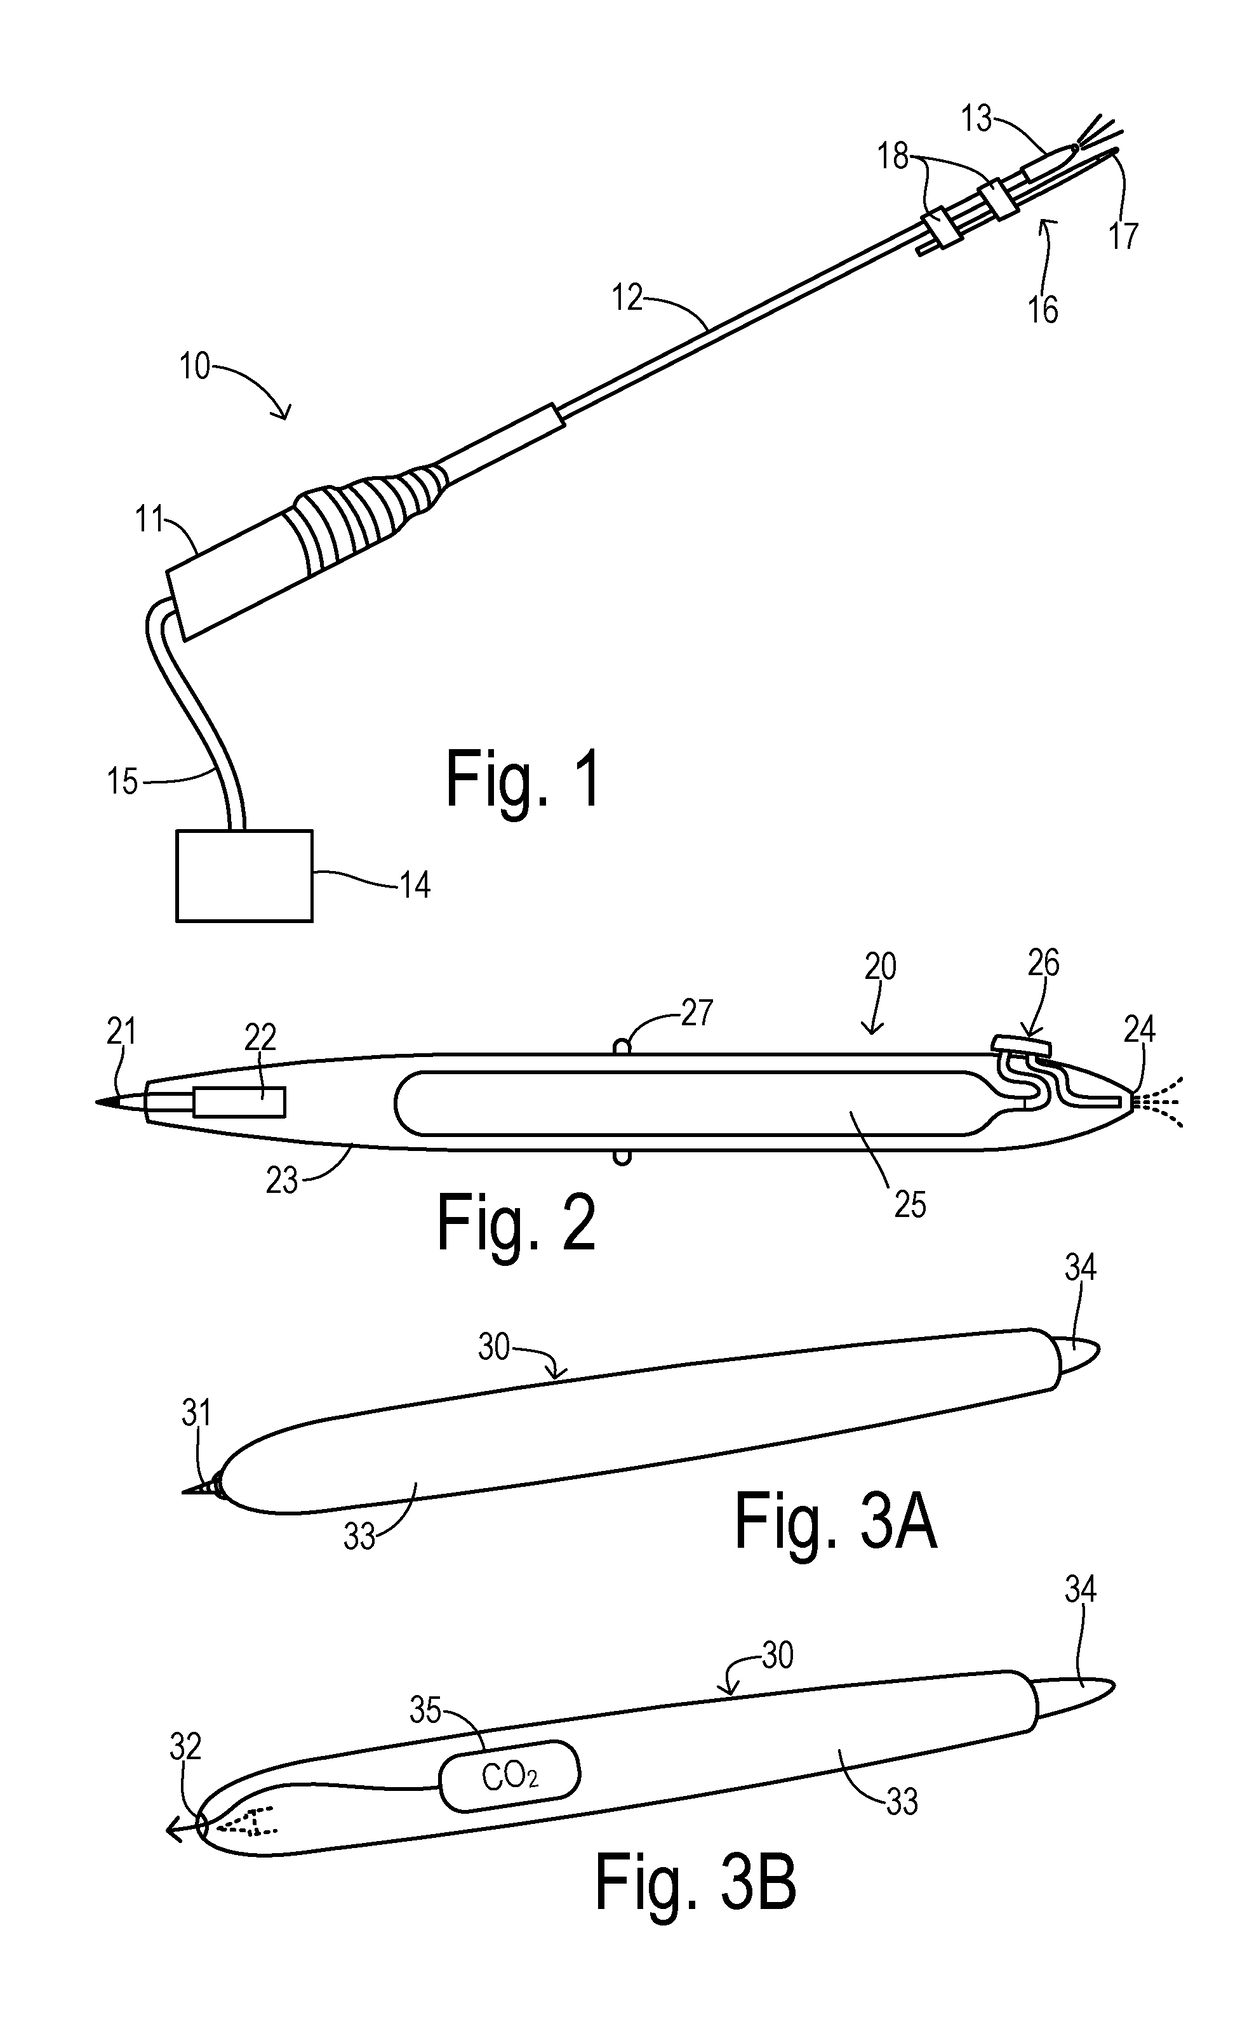 Surgical tissue marking device with dryer